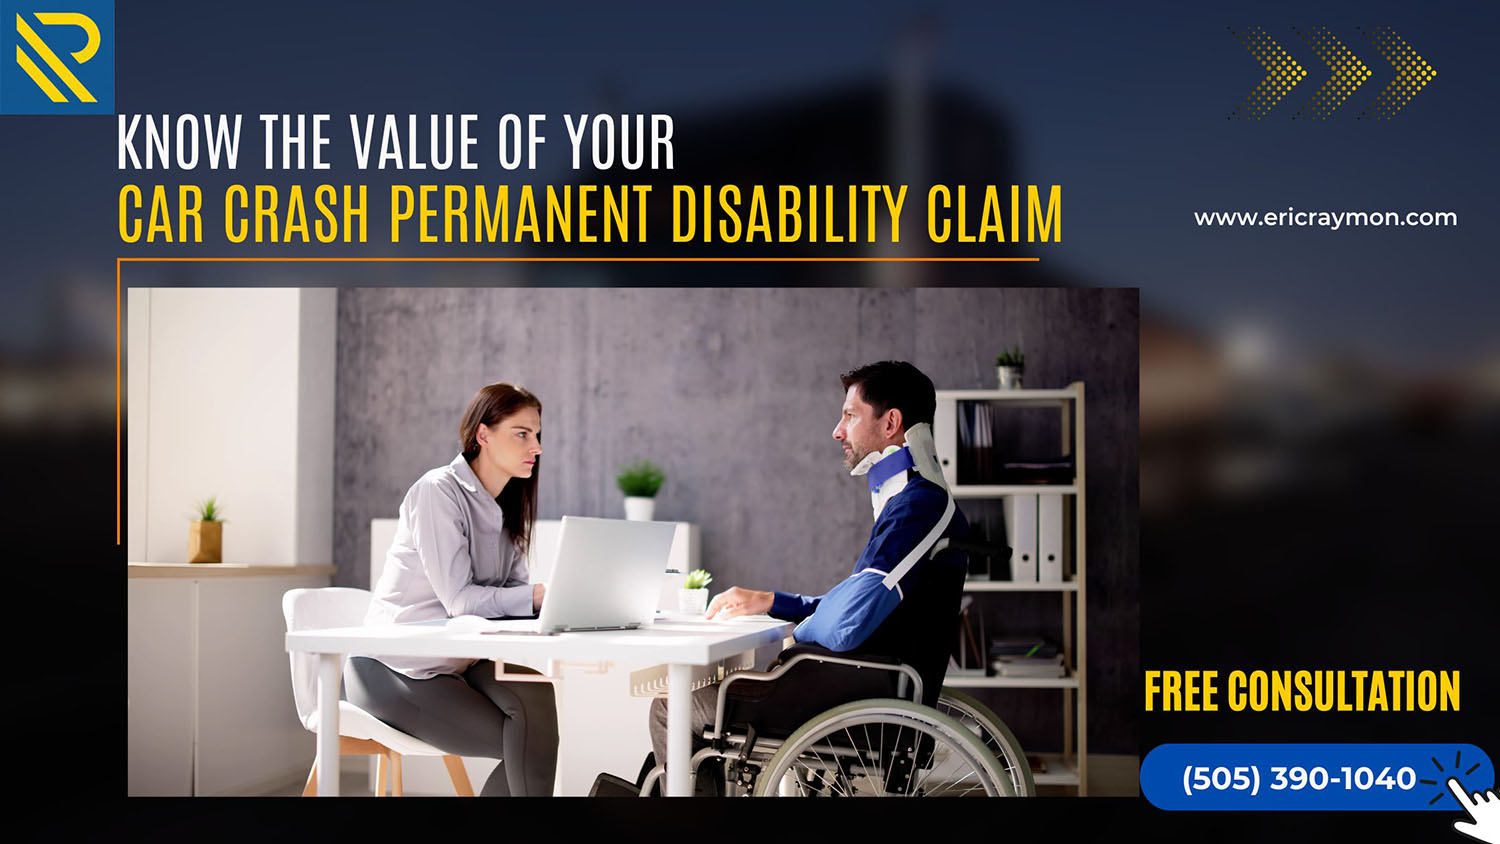 Know the Value of Your Car Crash Permanent Disability Claim